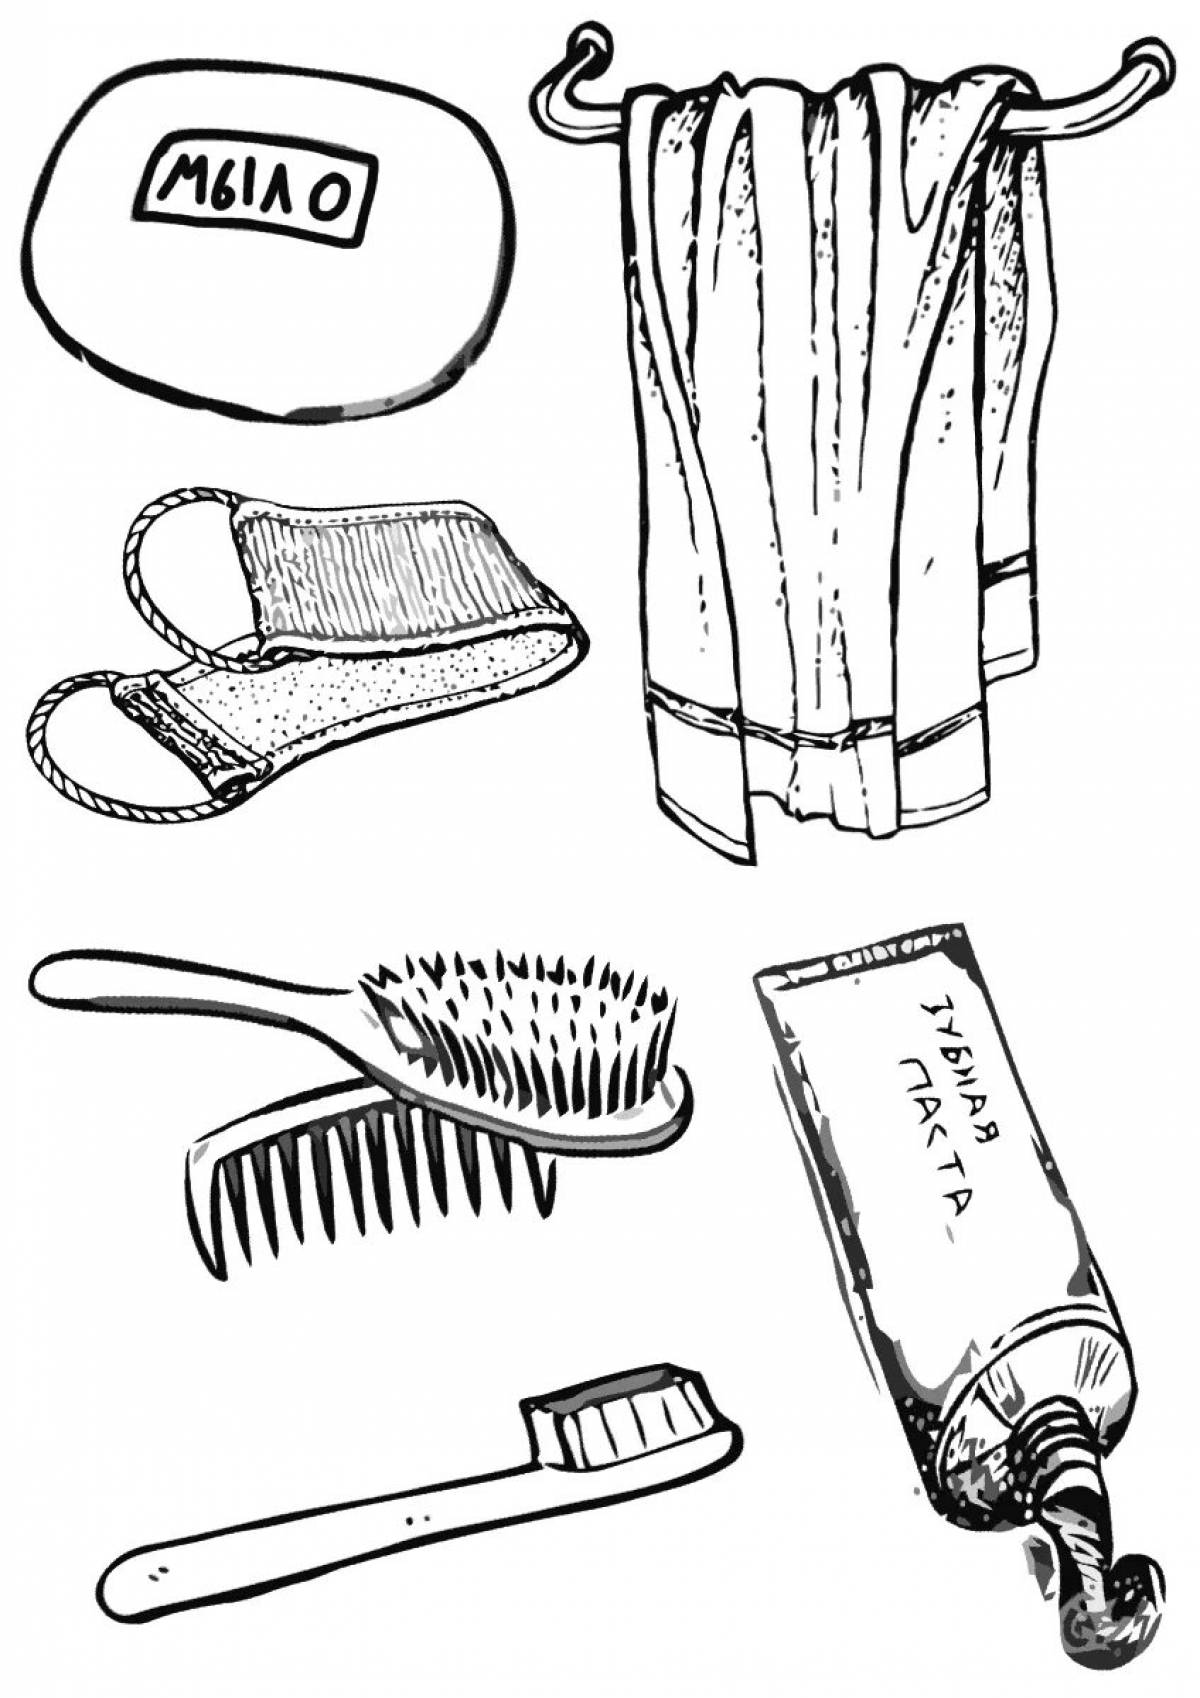 Personal care items #3